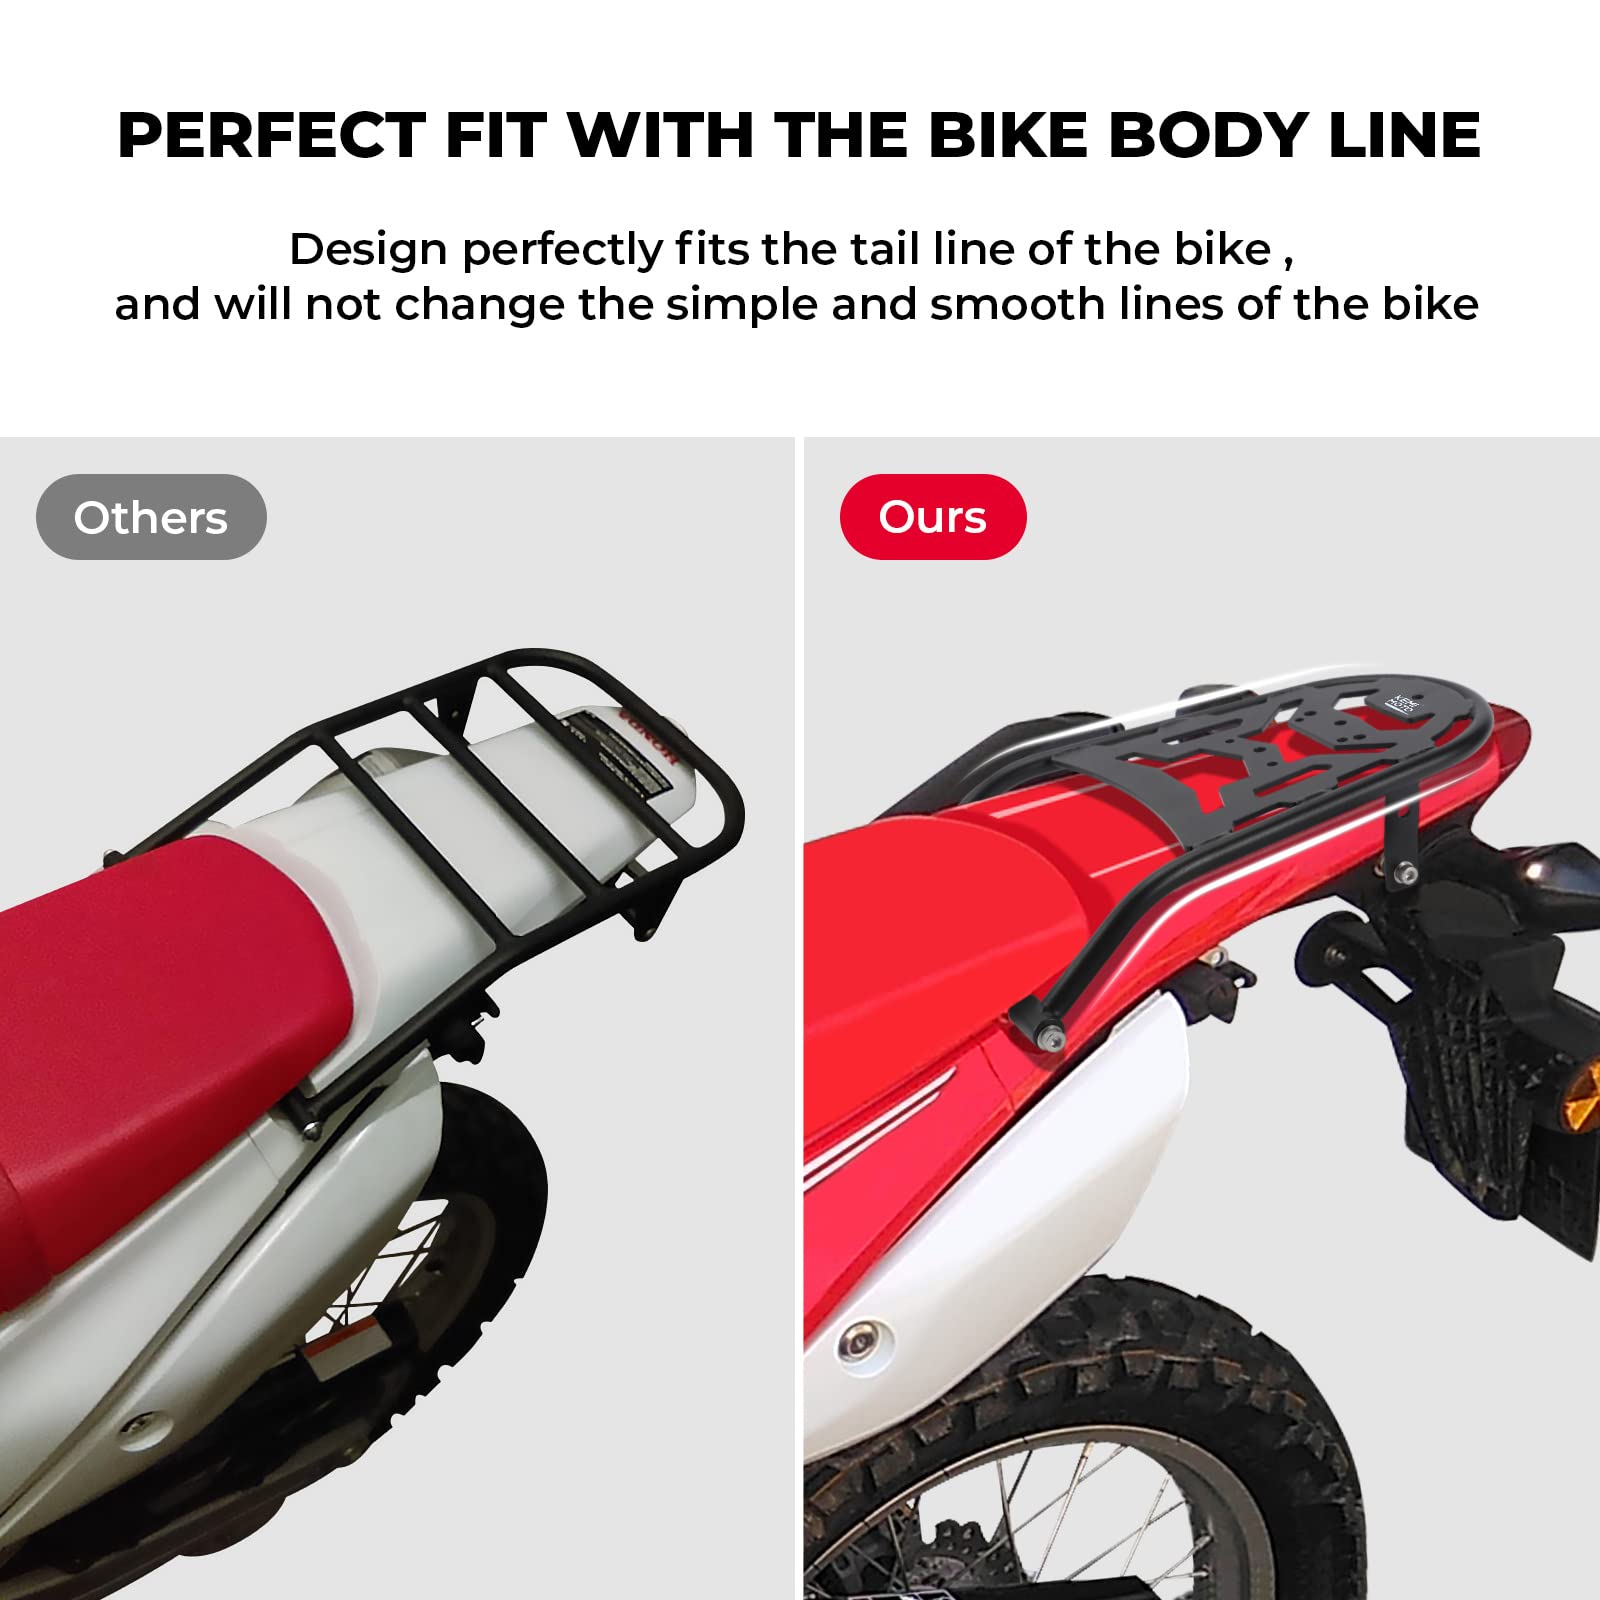 Rear Rack Compatible with CRF250L CRF250M – Kemimoto